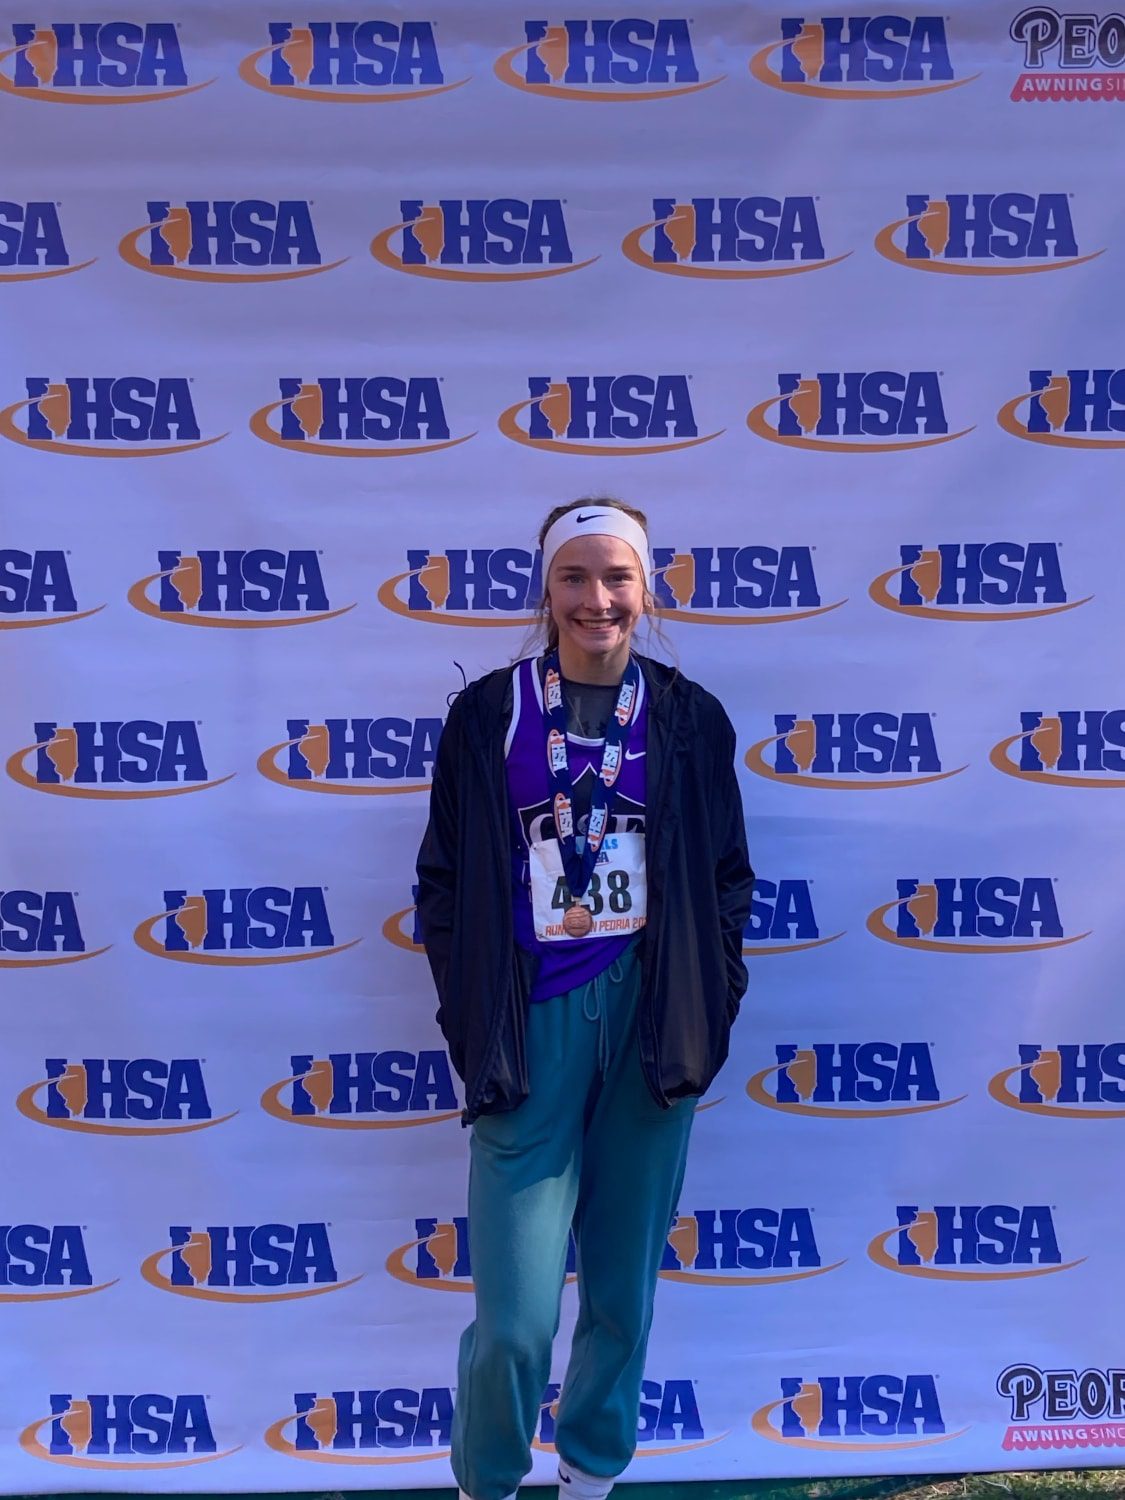 Russell places sixth at IHSA State cross country meet